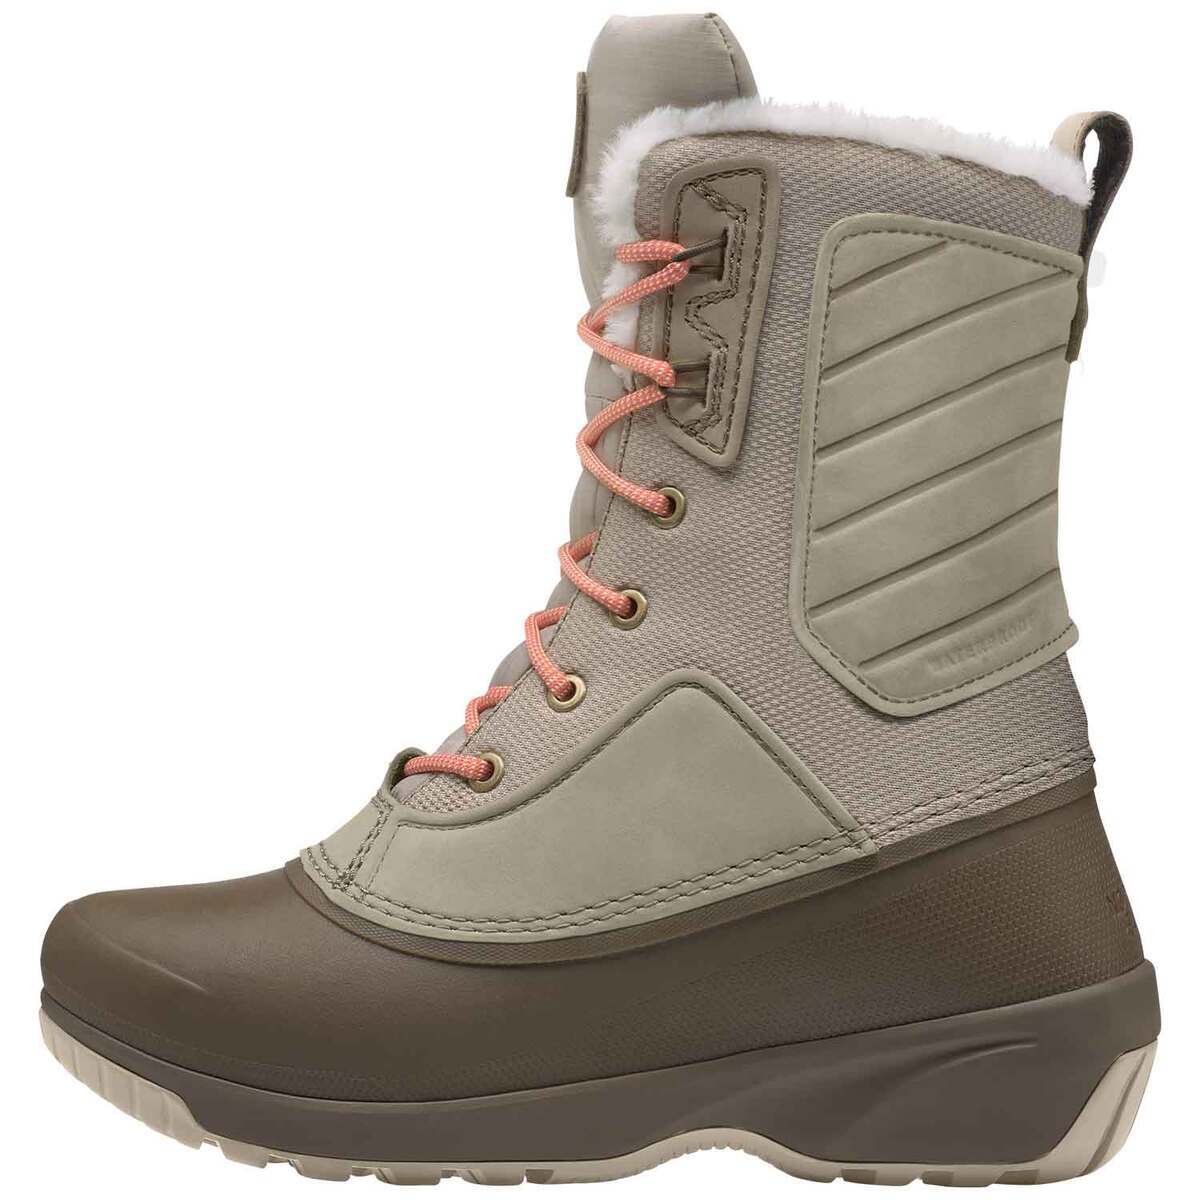 The North Face Women's Shellista IV Mid Waterproof Winter Boots ...